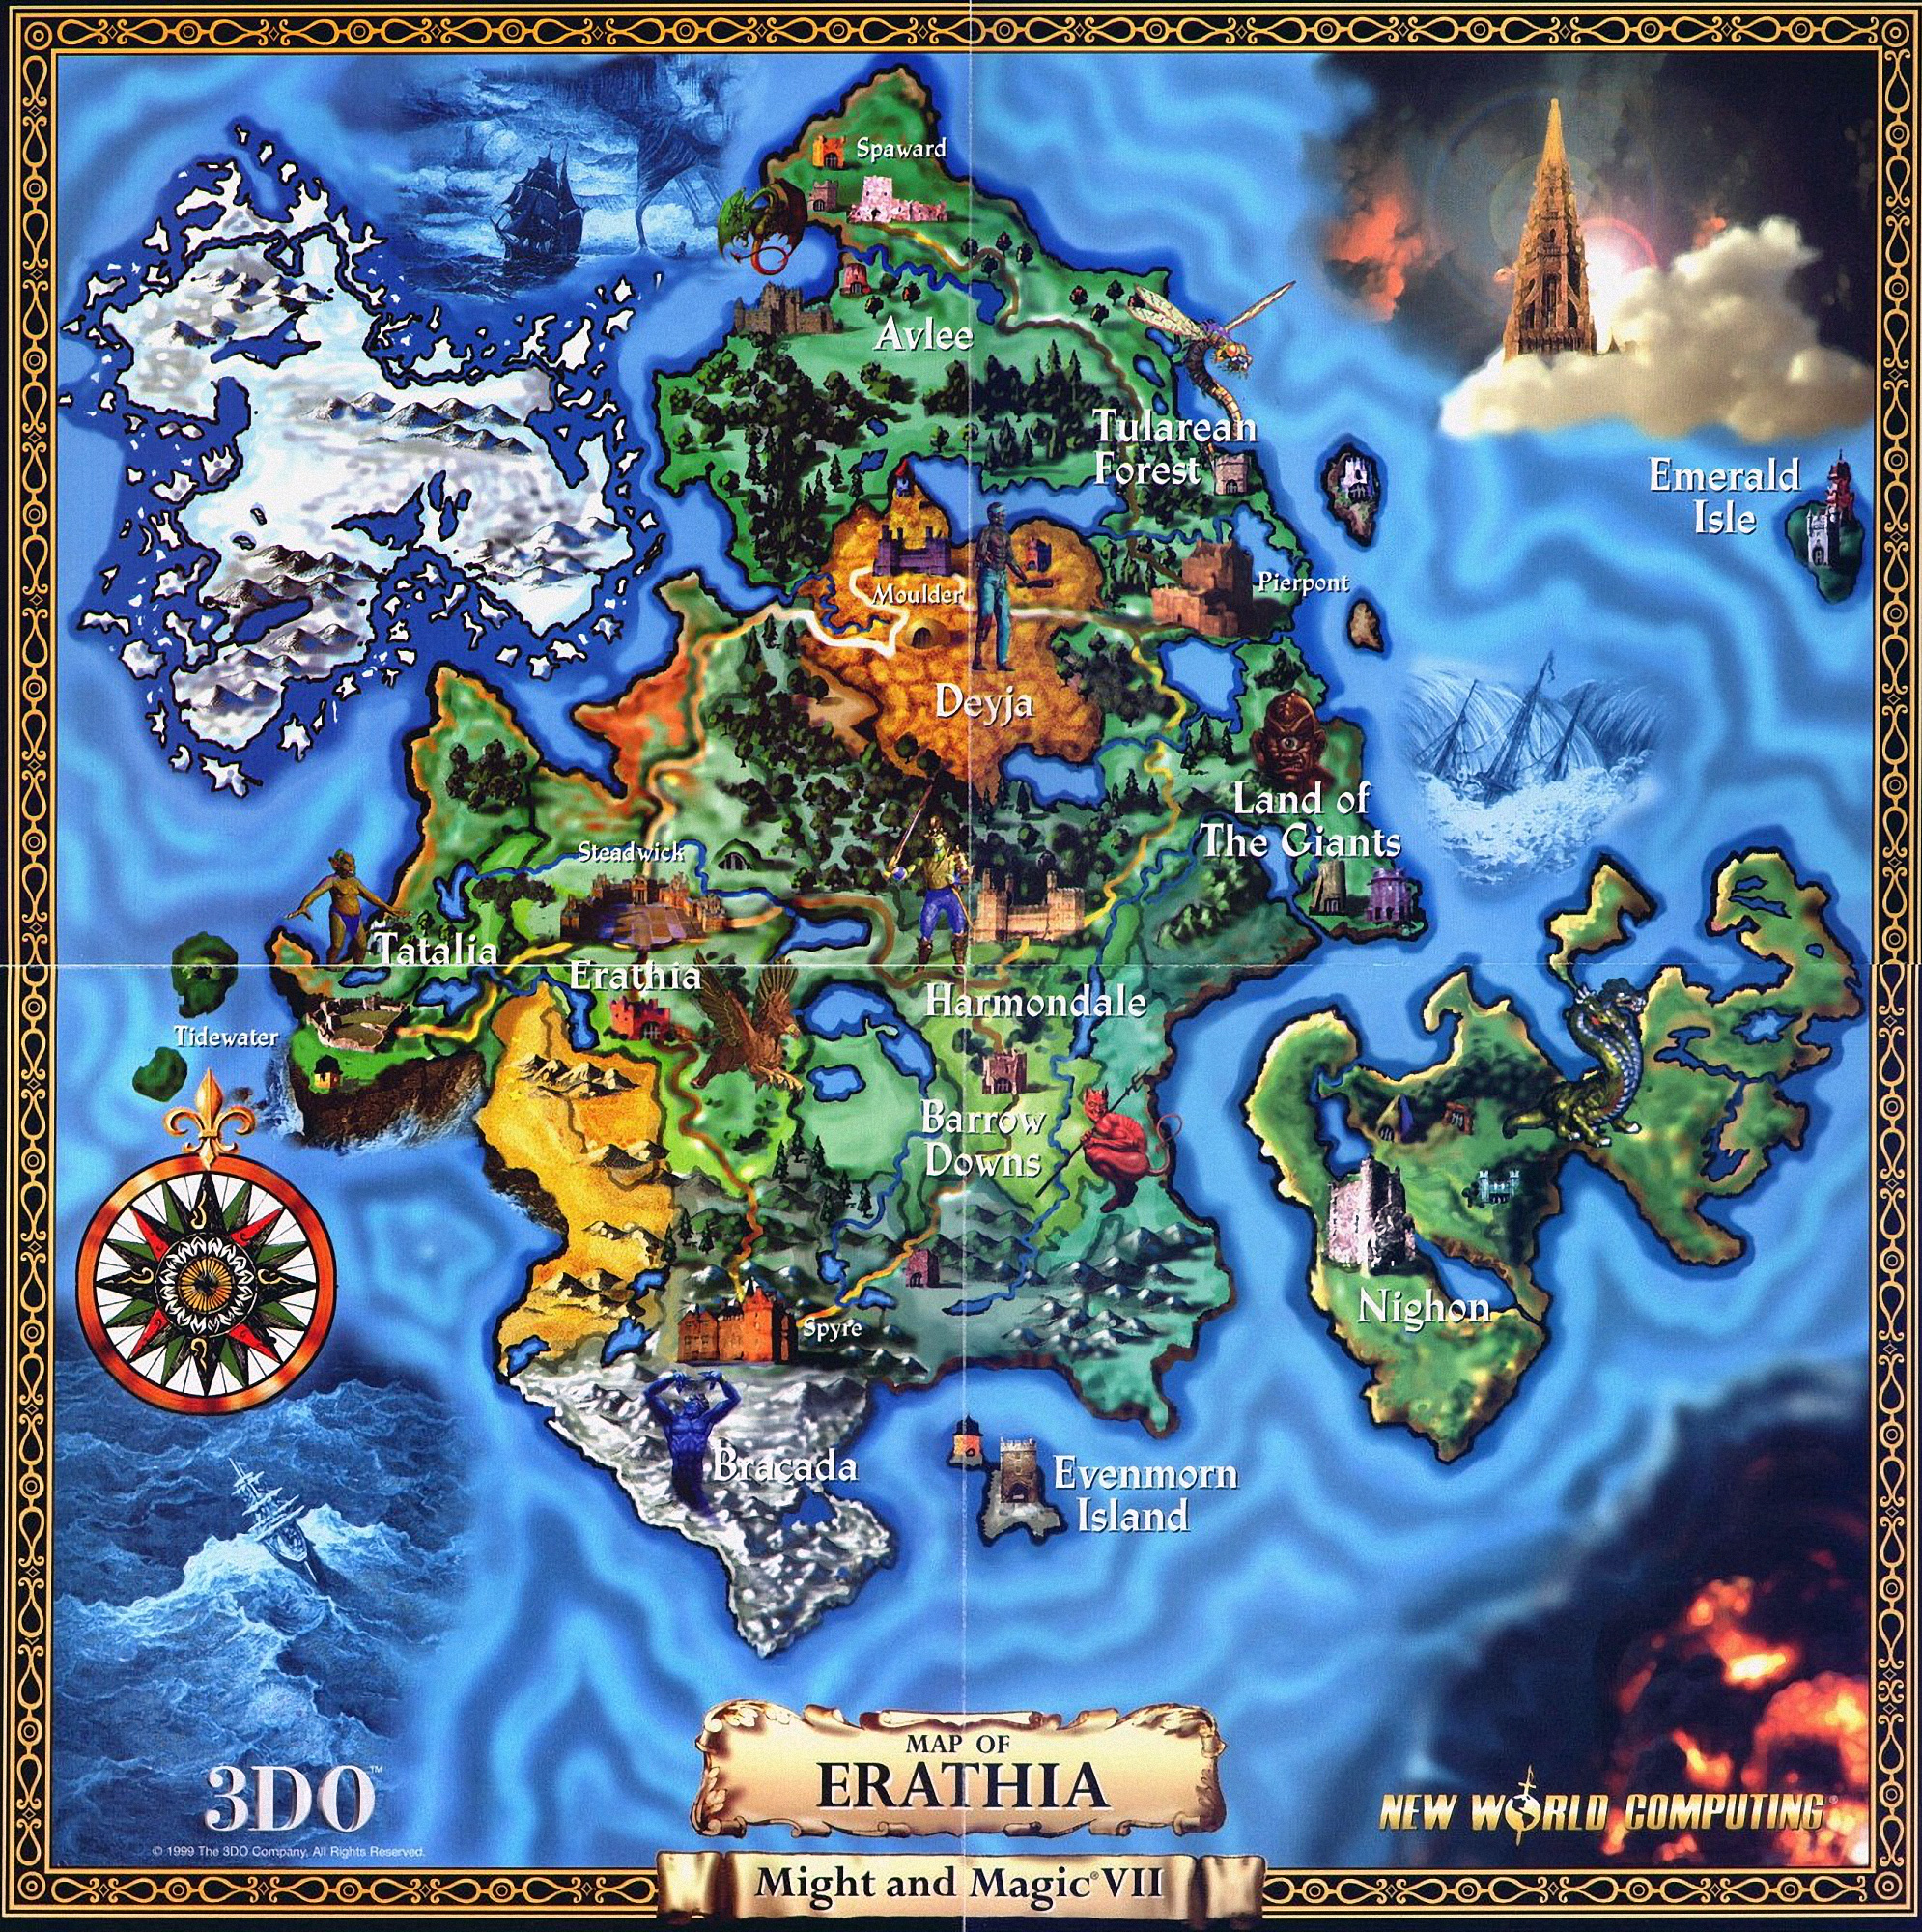 might and magic 7 world map Vori Might And Magic Wiki Fandom might and magic 7 world map